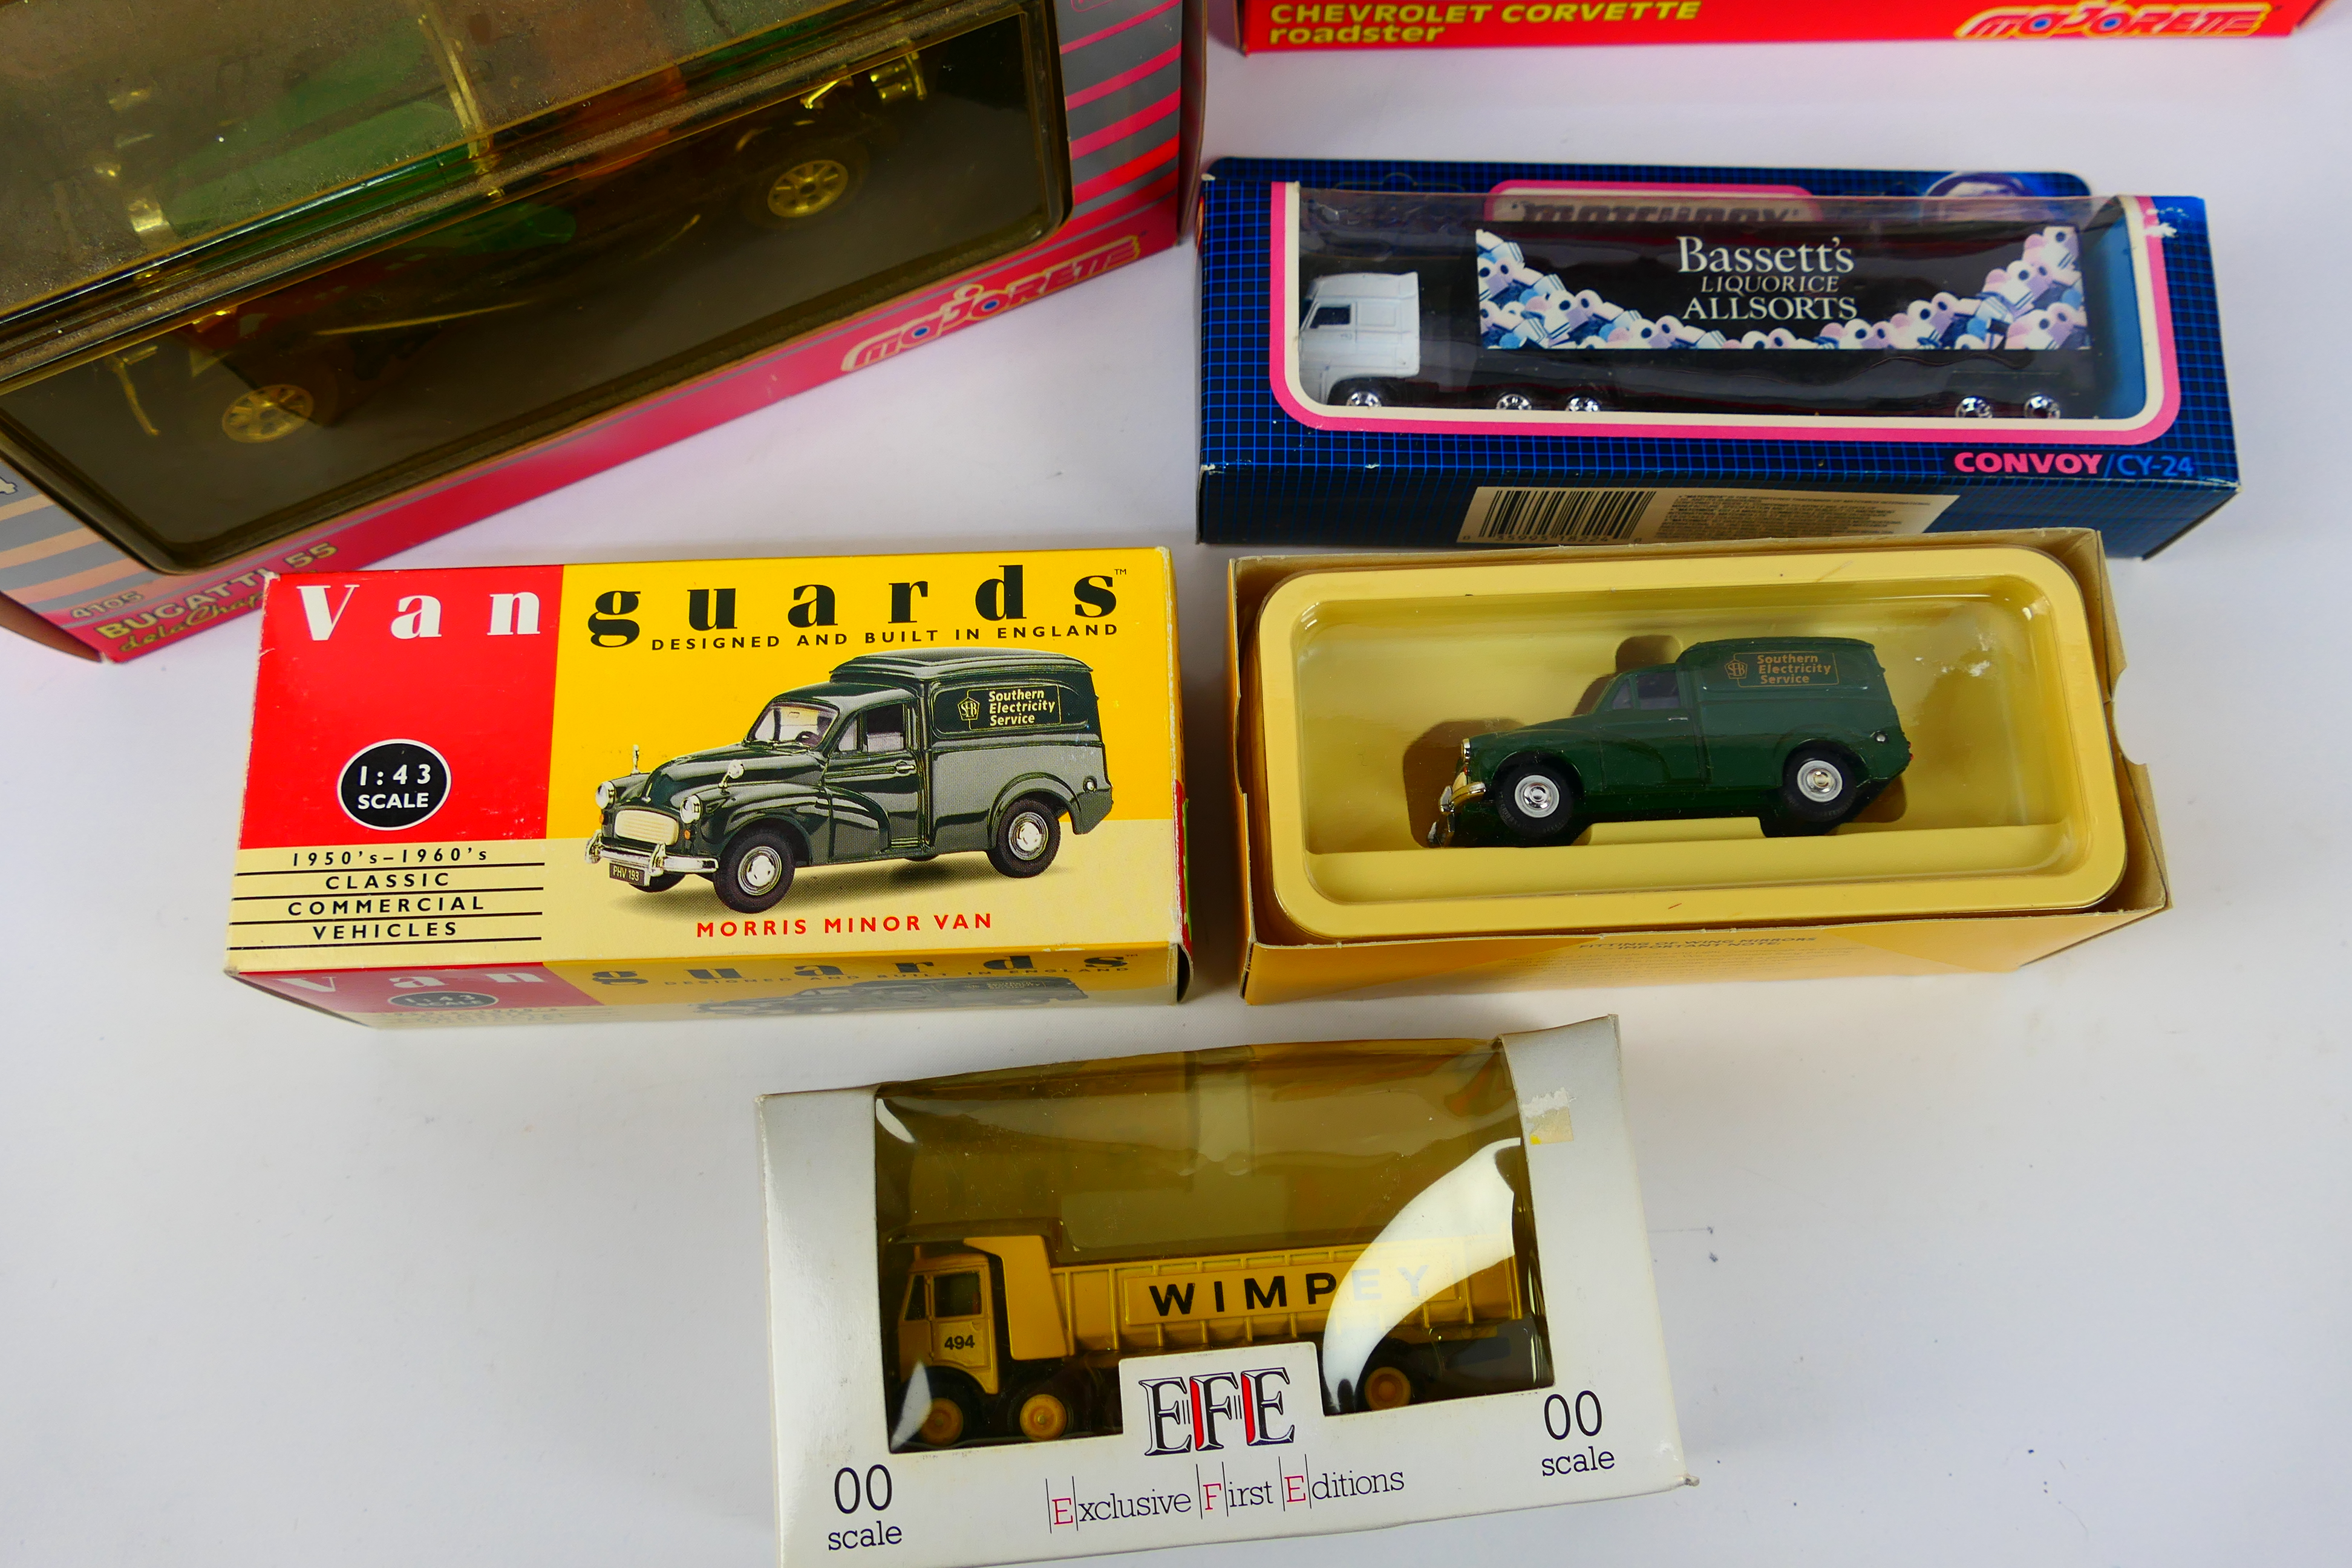 Matchbox - Majorette - Old Cars - Vanguards - 8 x boxed models including Porsche 944 in 1:24 scale, - Image 5 of 5